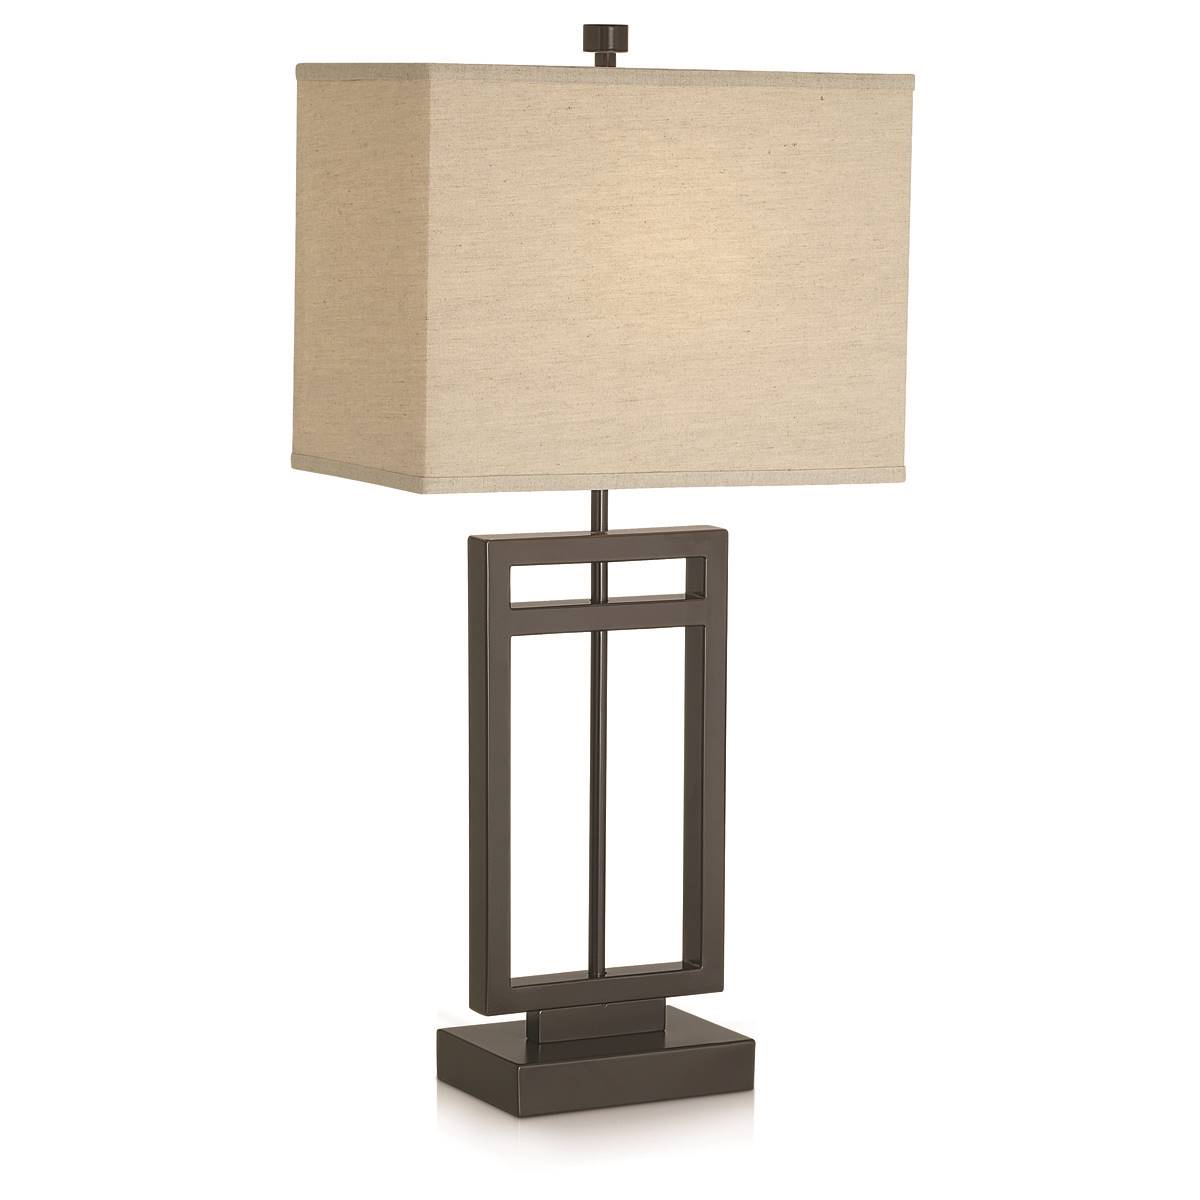 Pacific Coast Lighting Central Loft 30.5in. Bronze Table Lamp